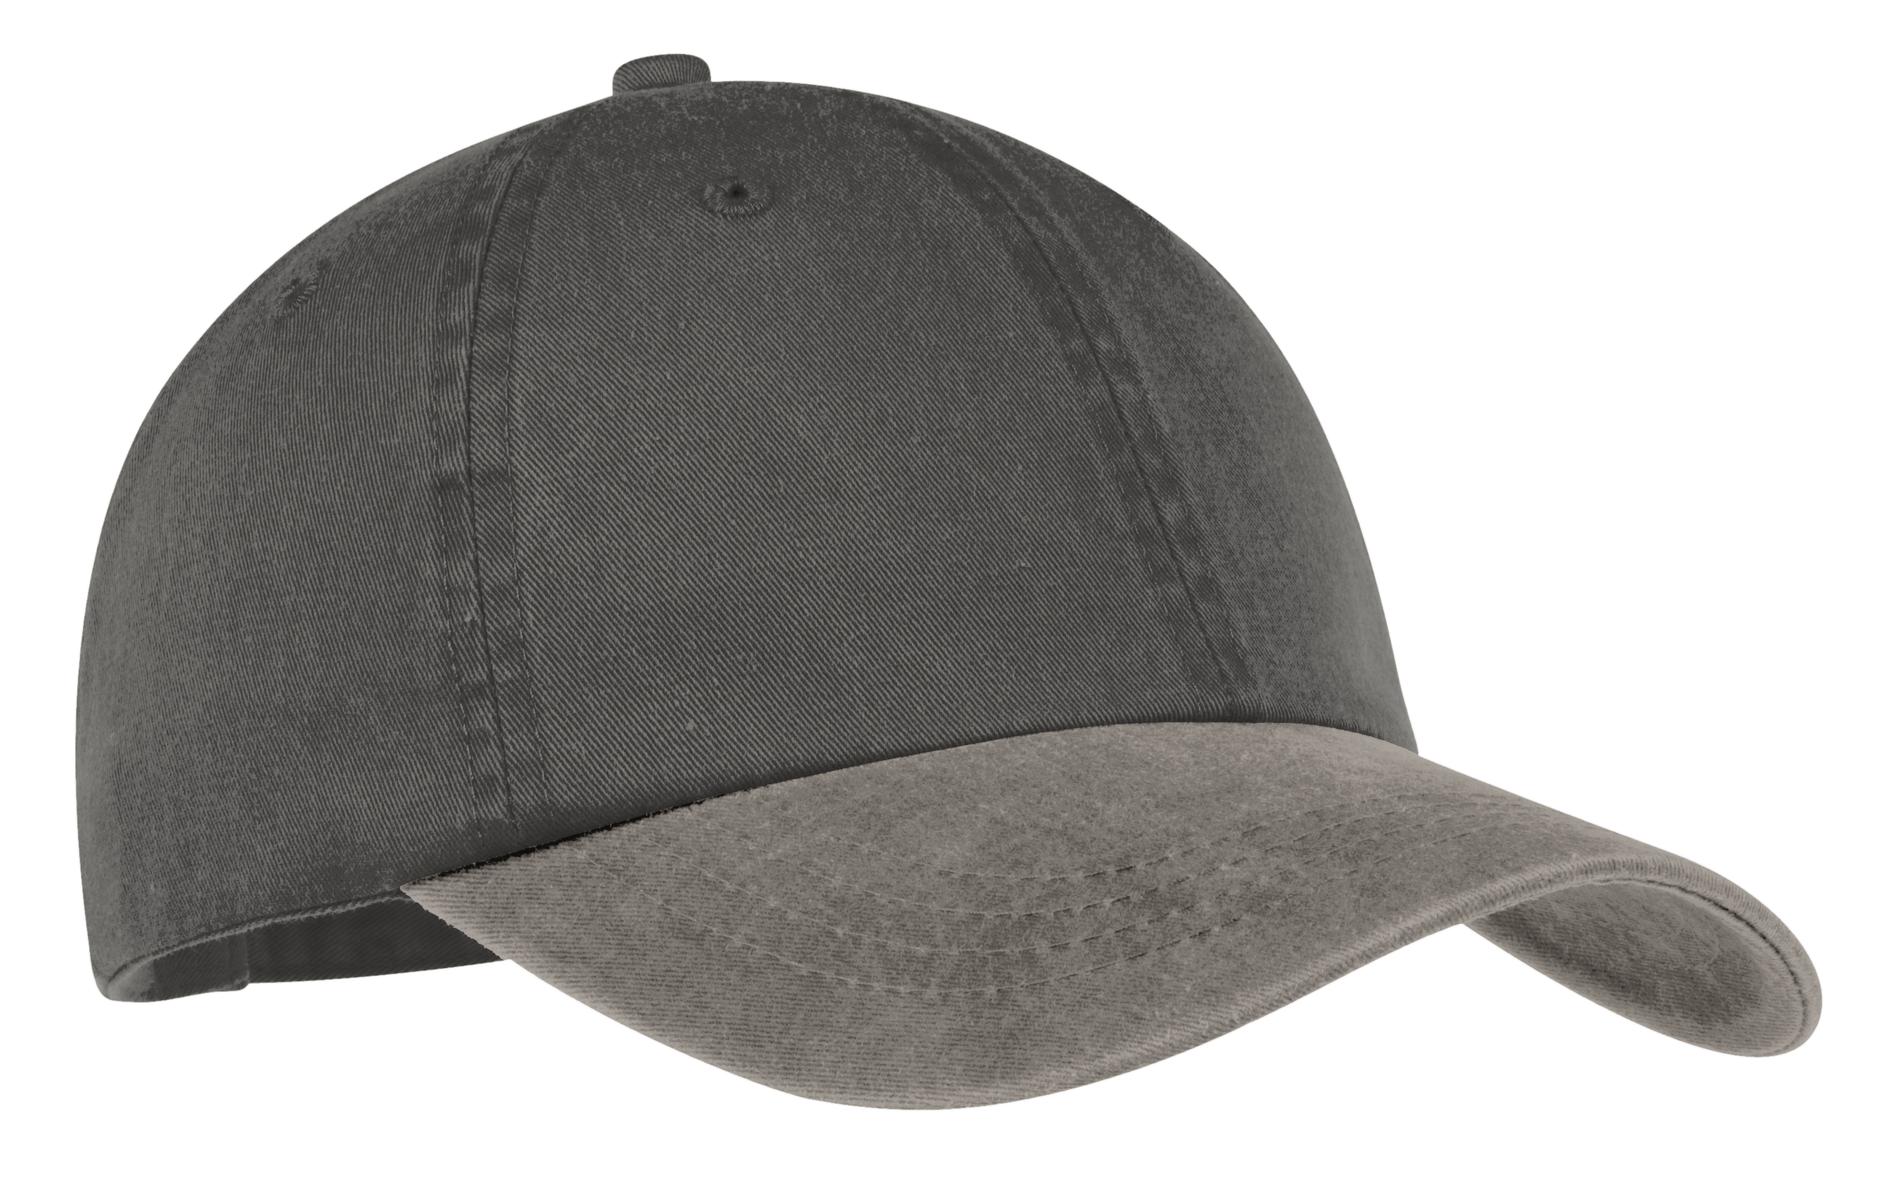 Port & Company® -Two-Tone Pigment-Dyed Cap.  CP83